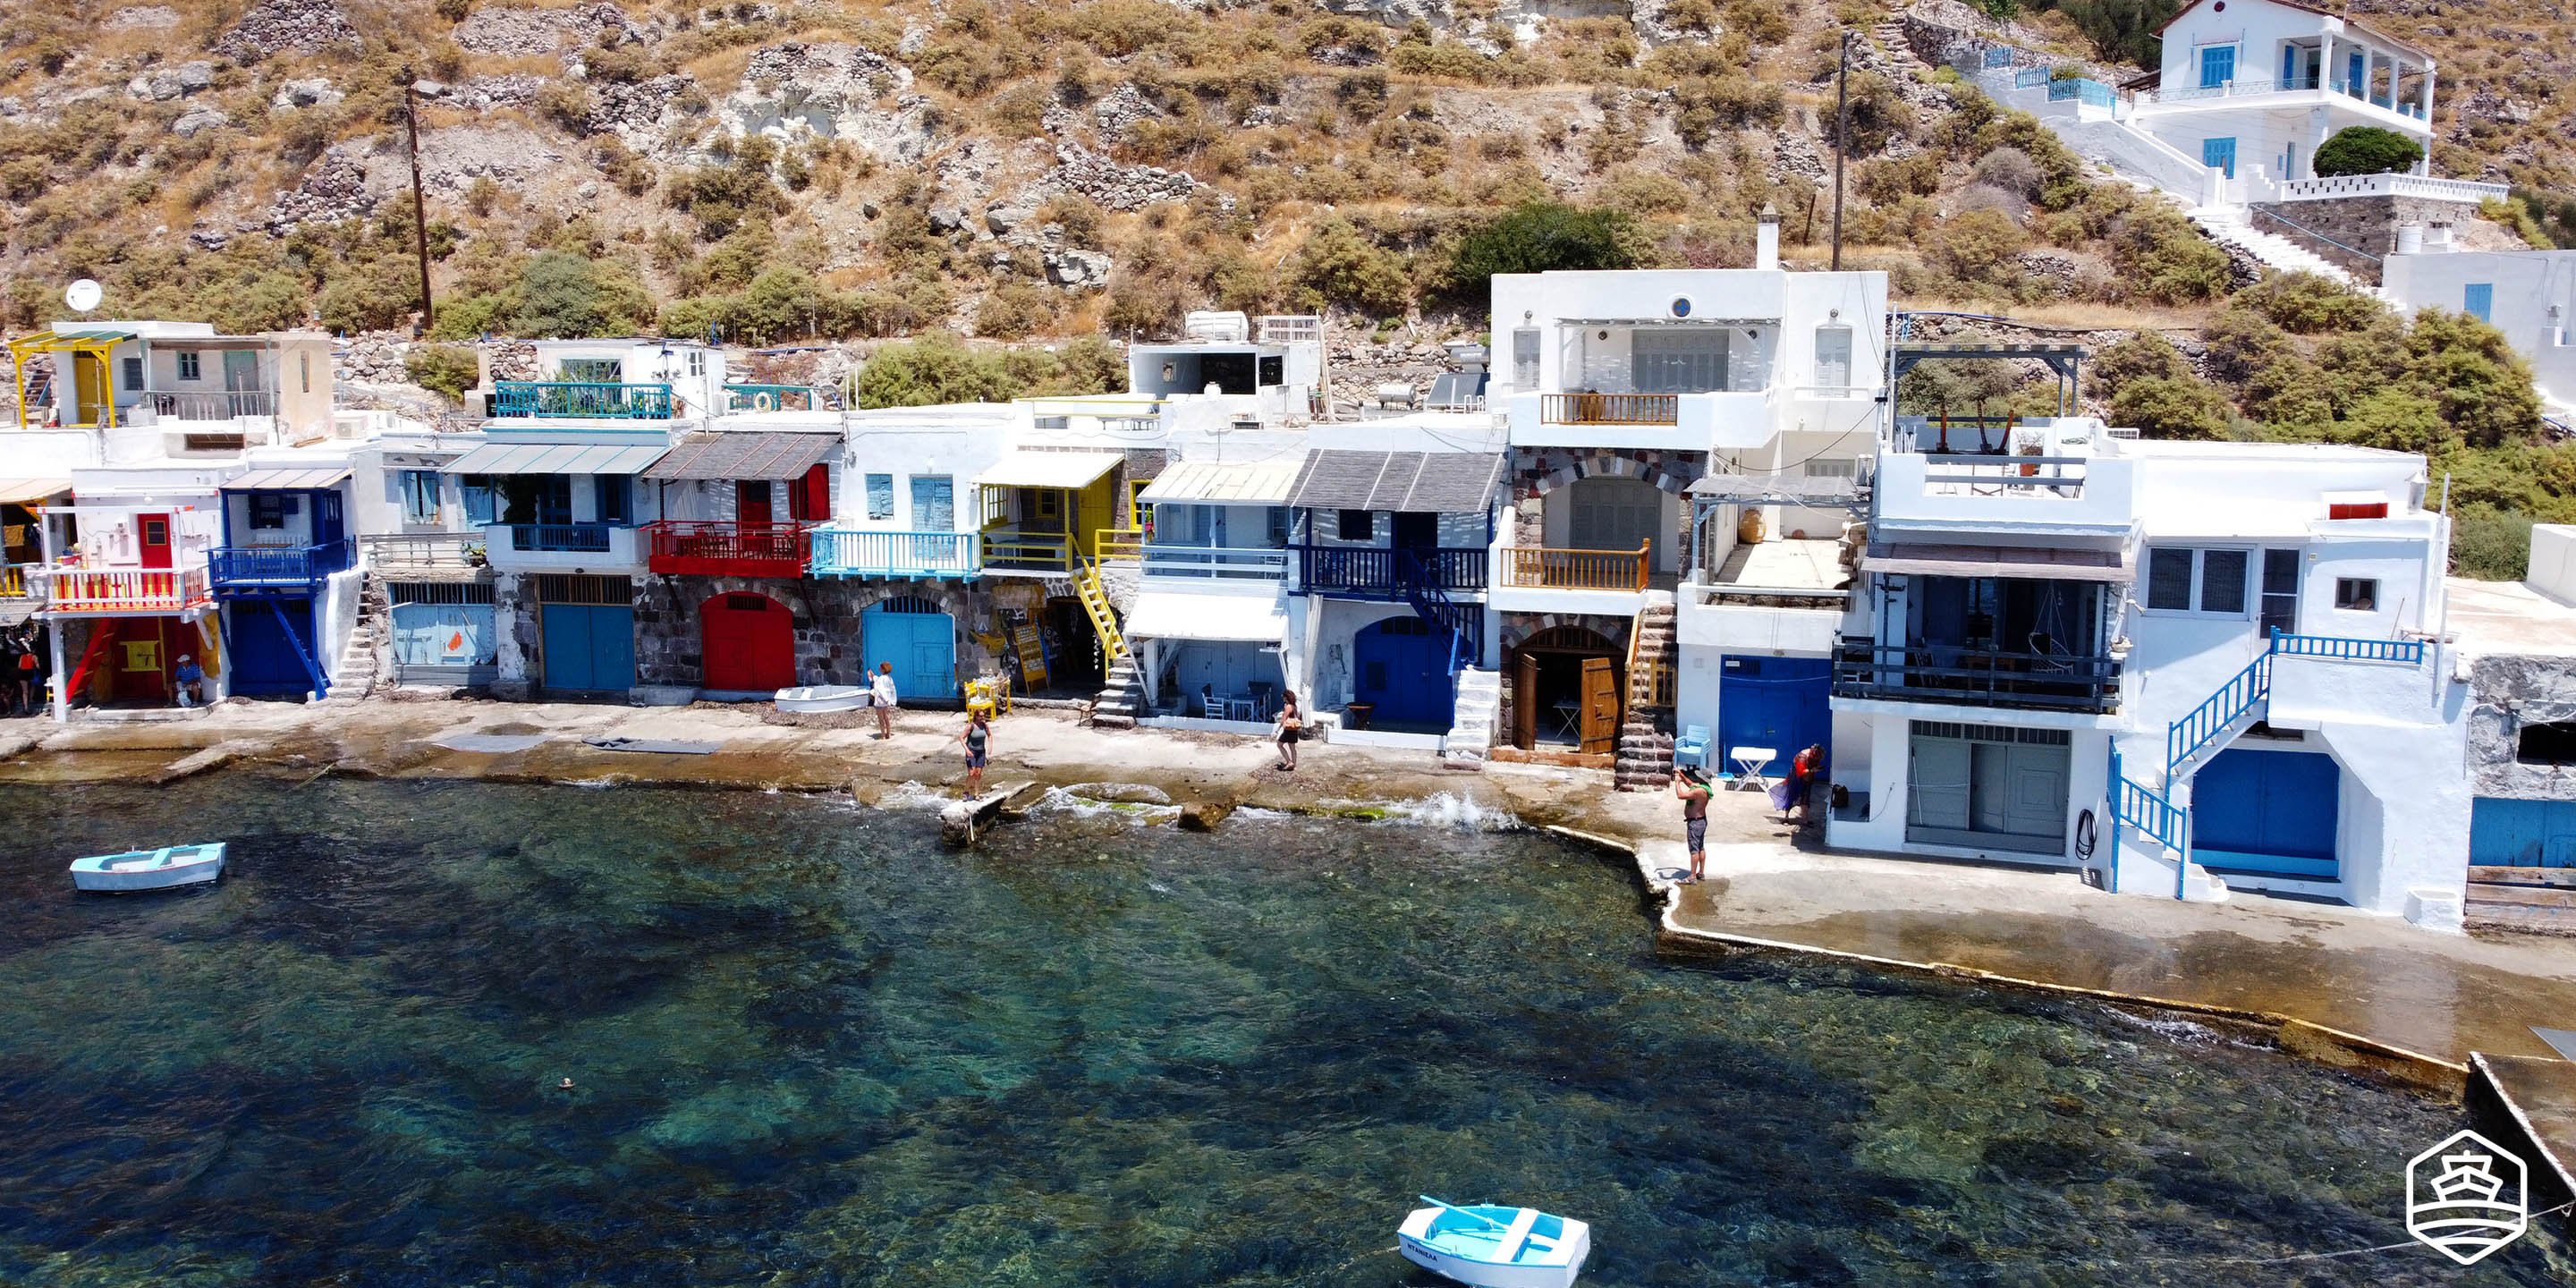 The colourful fisherman's houses in the village of Klima on the island of Milos, in Greece